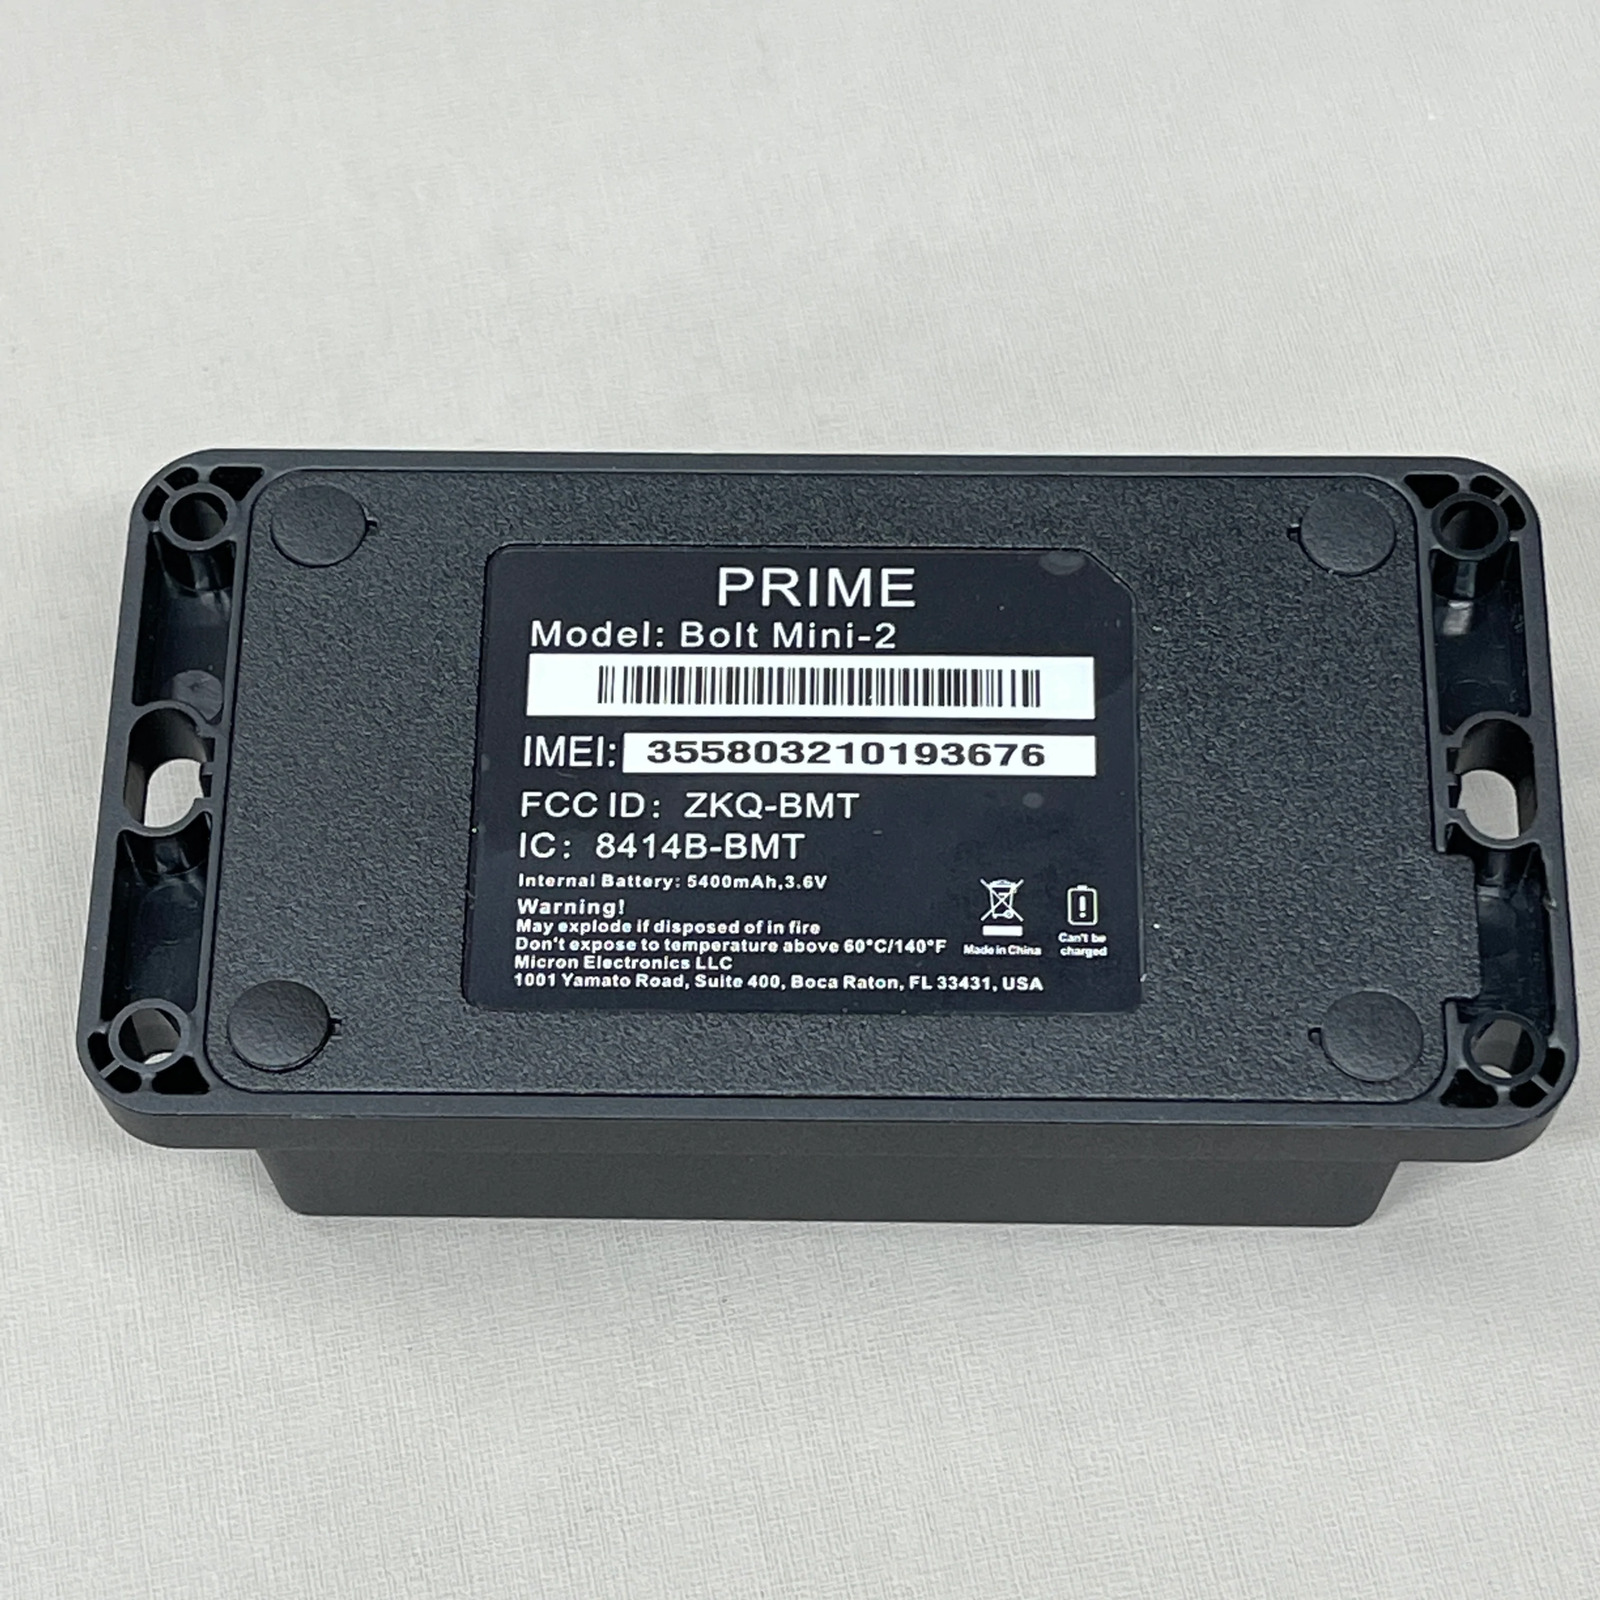 Photo of the back of a GPS tracker, with model name and IMEI number